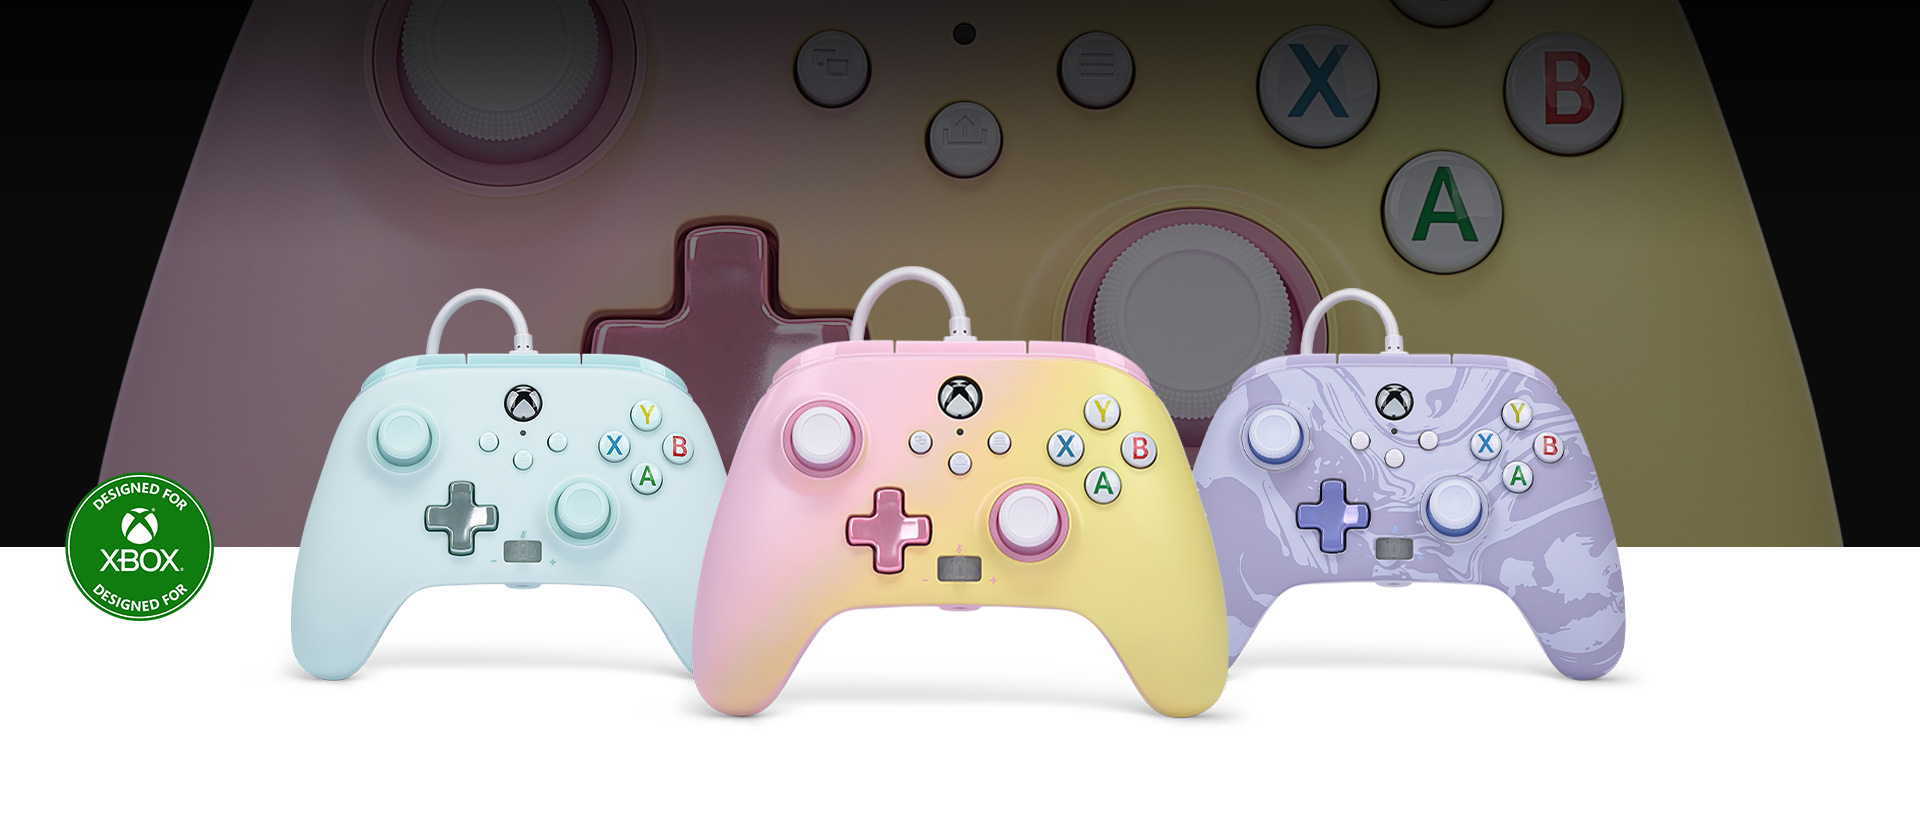 Designed for Xbox logo, Pink Lemonade controller in front with the Cotton Candy Blue and Purple Swirl controllers beside it